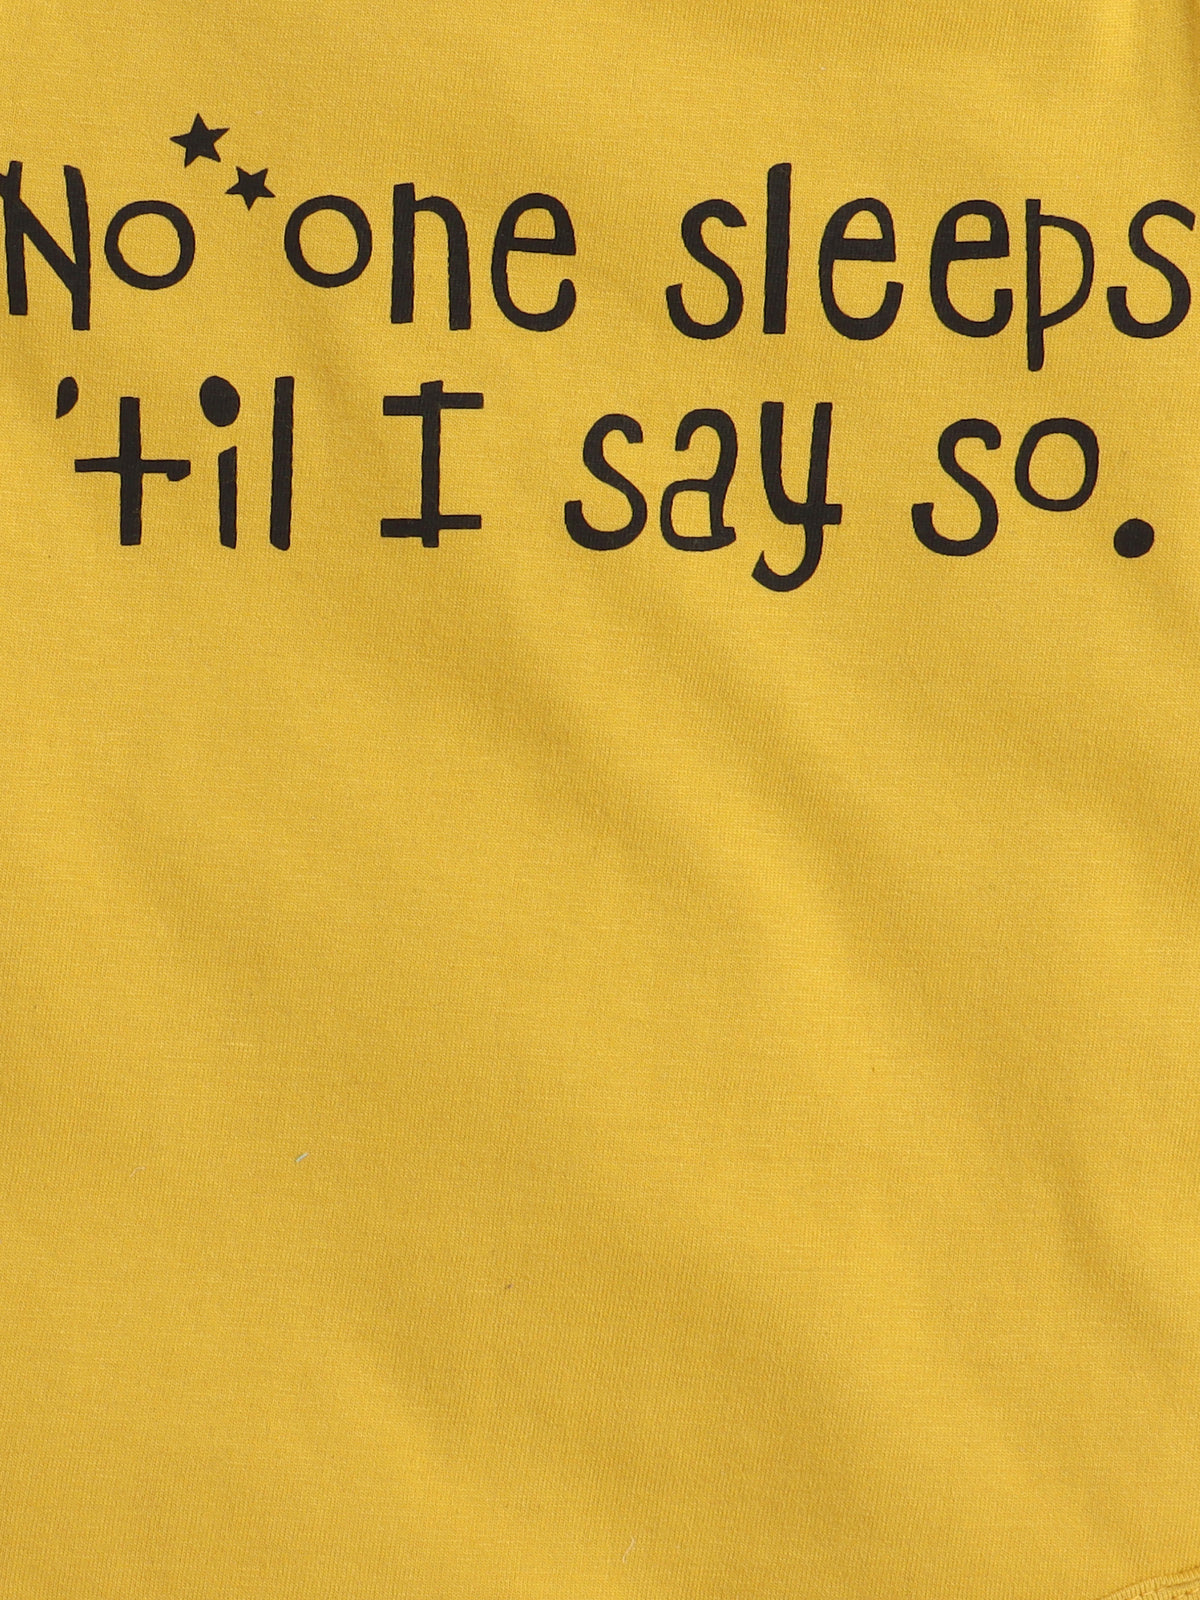 Comfortable Cotton Unisex Baby Onesies - Soft and Adorable - Yellow & Black with Quote